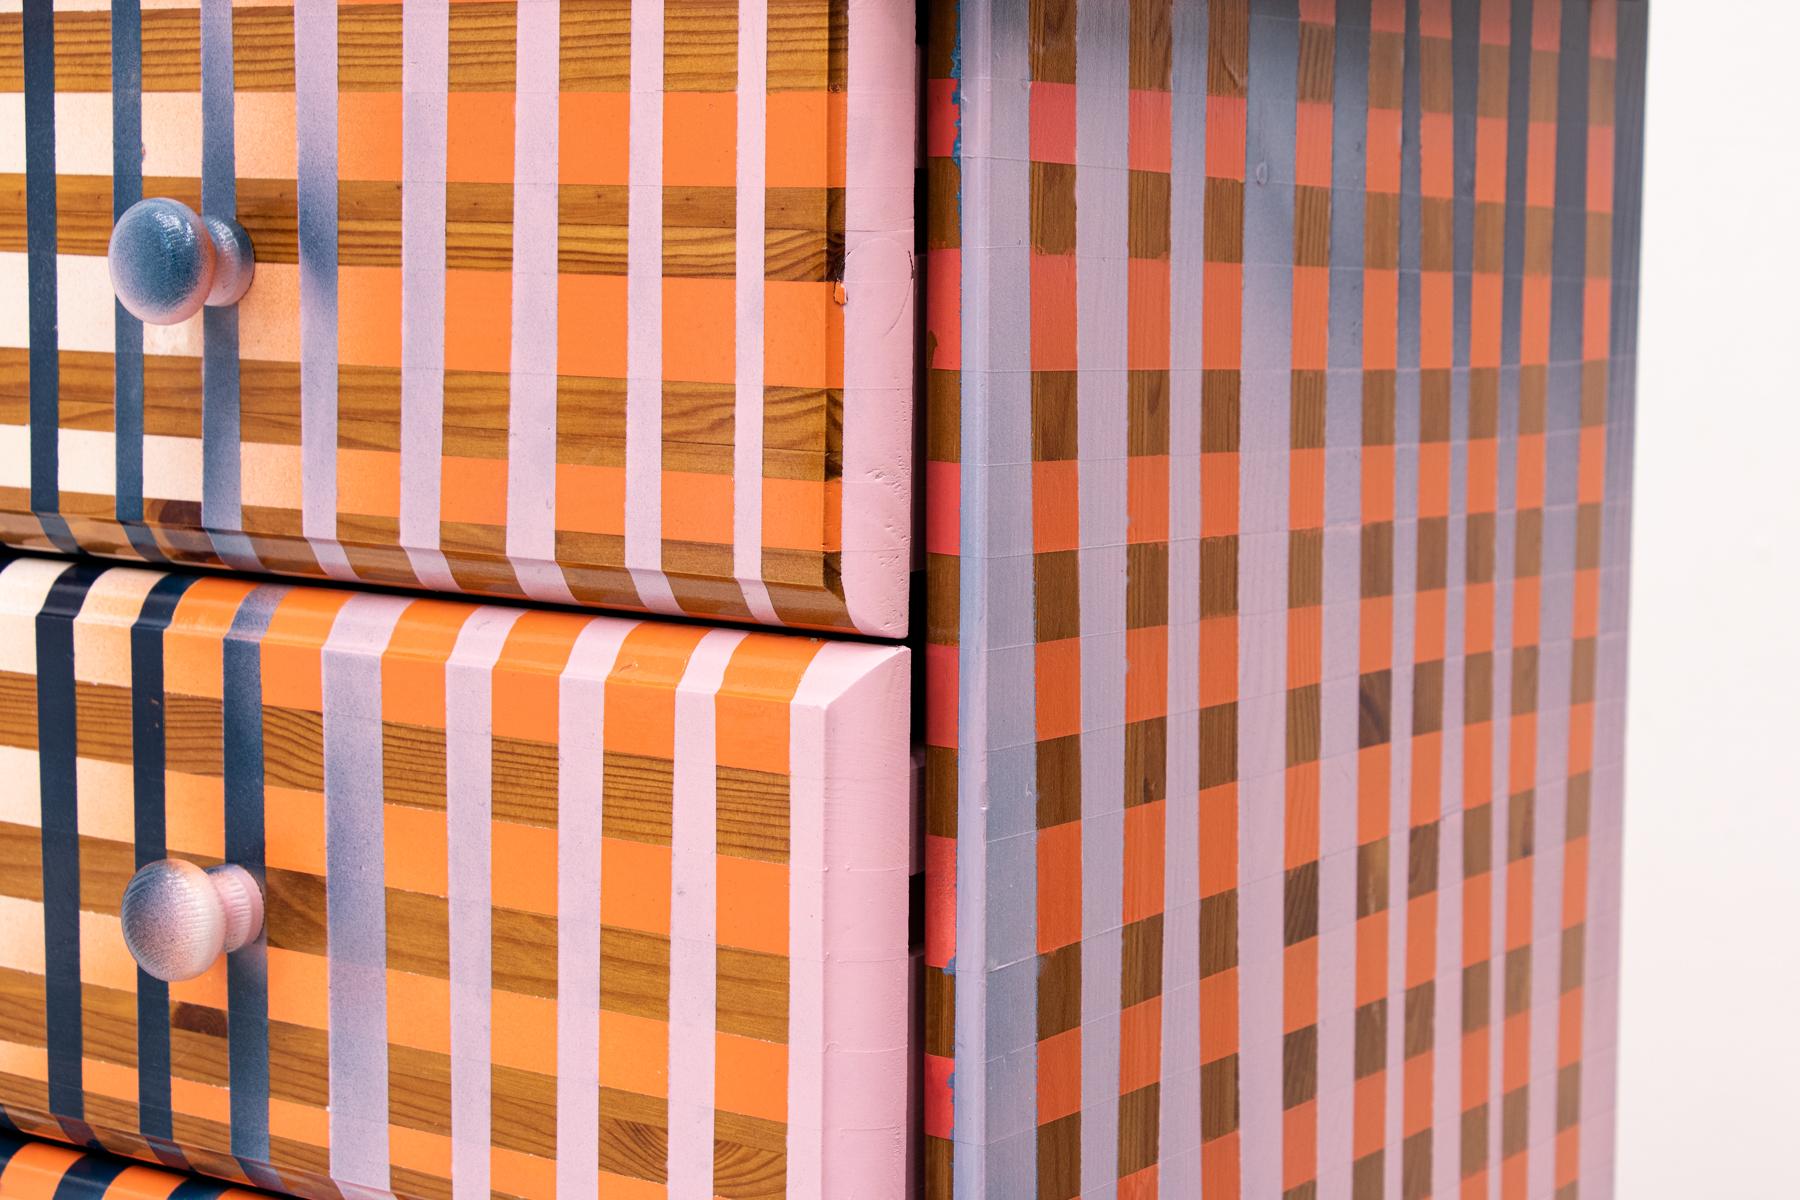 Simone Post has been making these furniture for a while in black and white but this is the first unique line of multicoloured furniture she made. 
Every piece is unique. They where exhibited for the first time at Art Rotterdam 2021. This New Old -